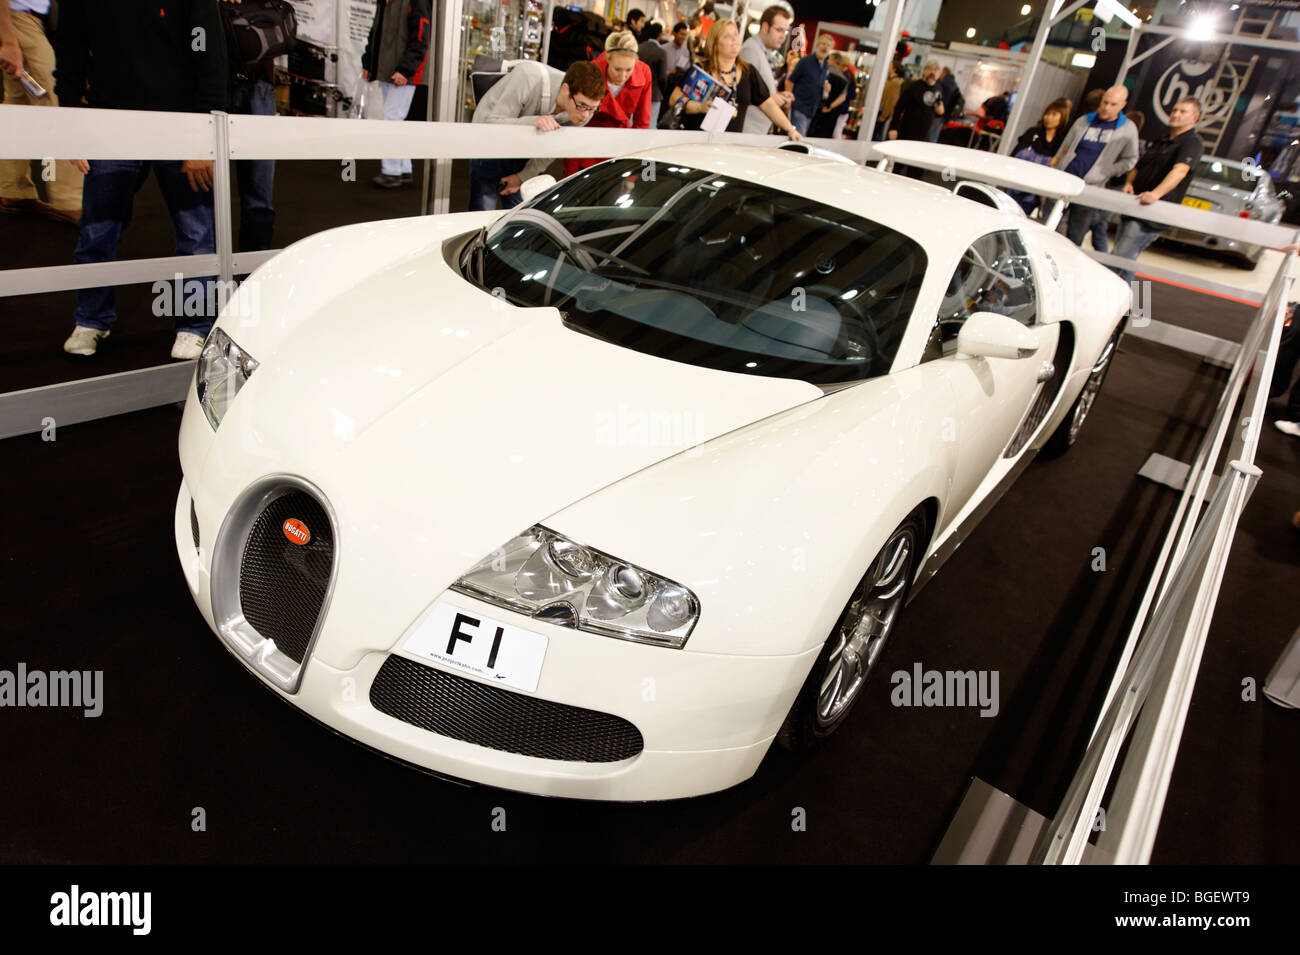 Worlds's most expensive Bugatti Veyron super car. The F1 number plate alone was sold for £440,625 in 2007. London. UK 2009. Stock Photo